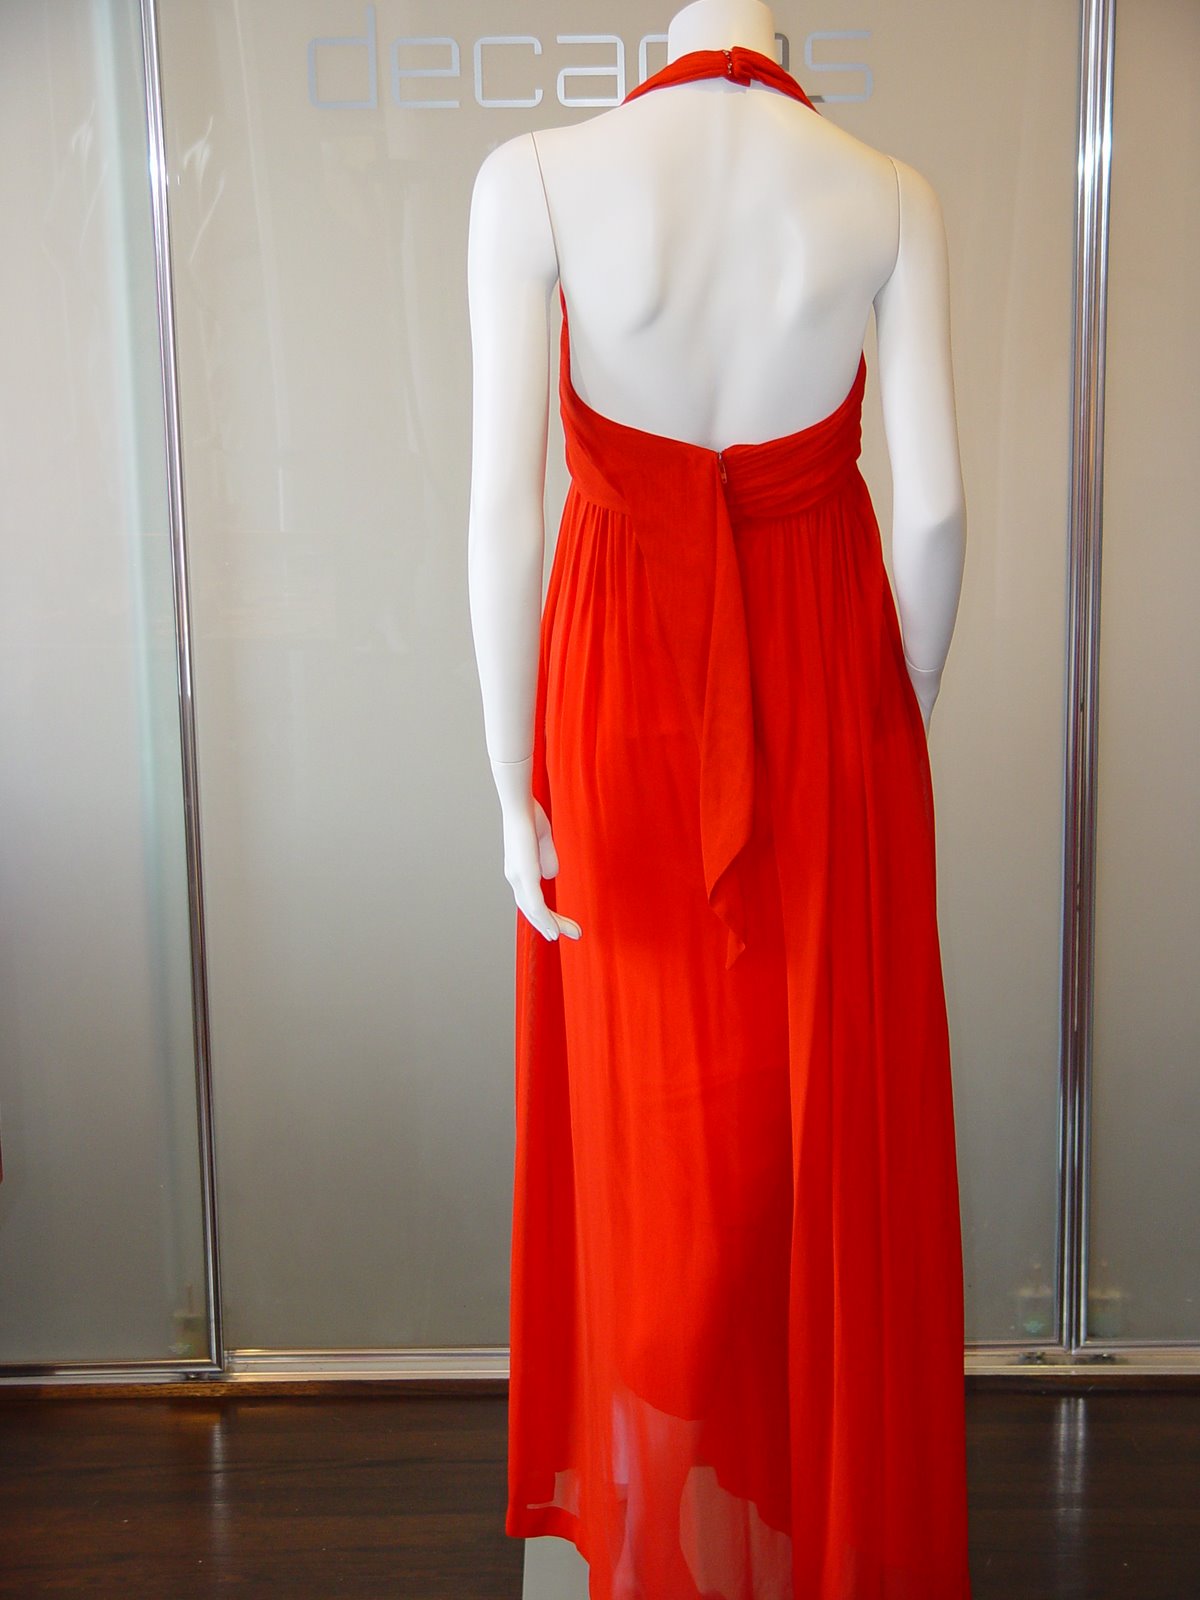 [CHRISTIAN+LACROIX+CRUISE+1994+CORAL+JUMPSUIT+HALTER+WITH+LACE+INSERT.JPG.JPG]